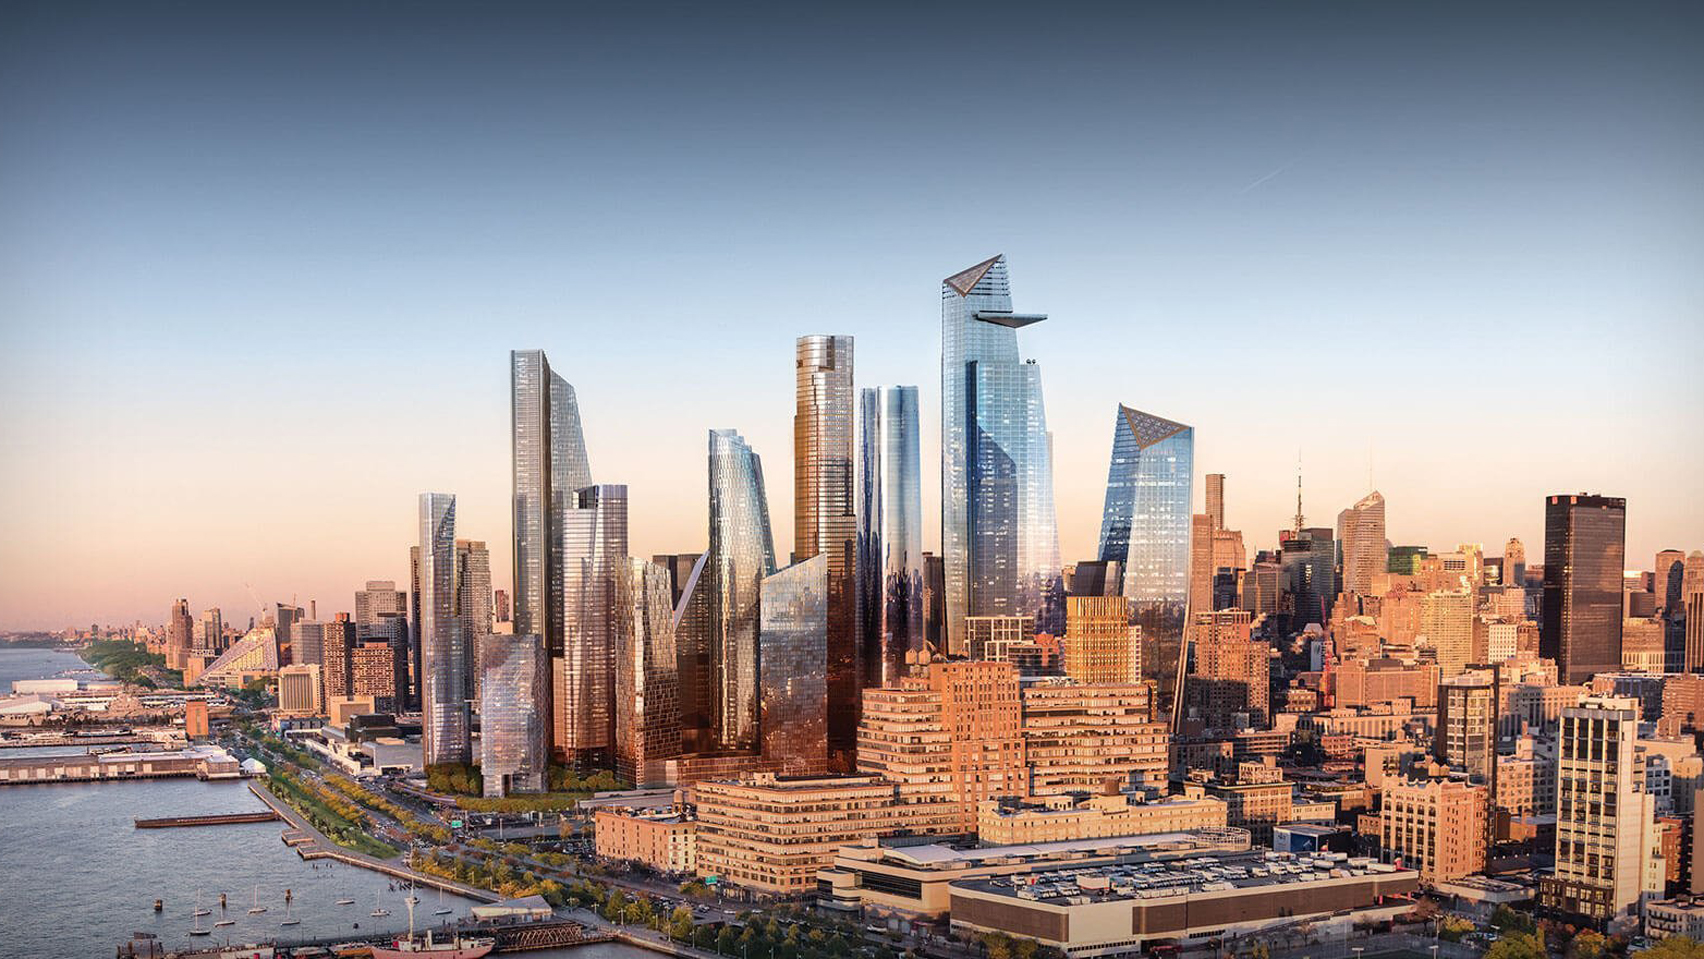 Seven of the biggest building projects underway in NYC